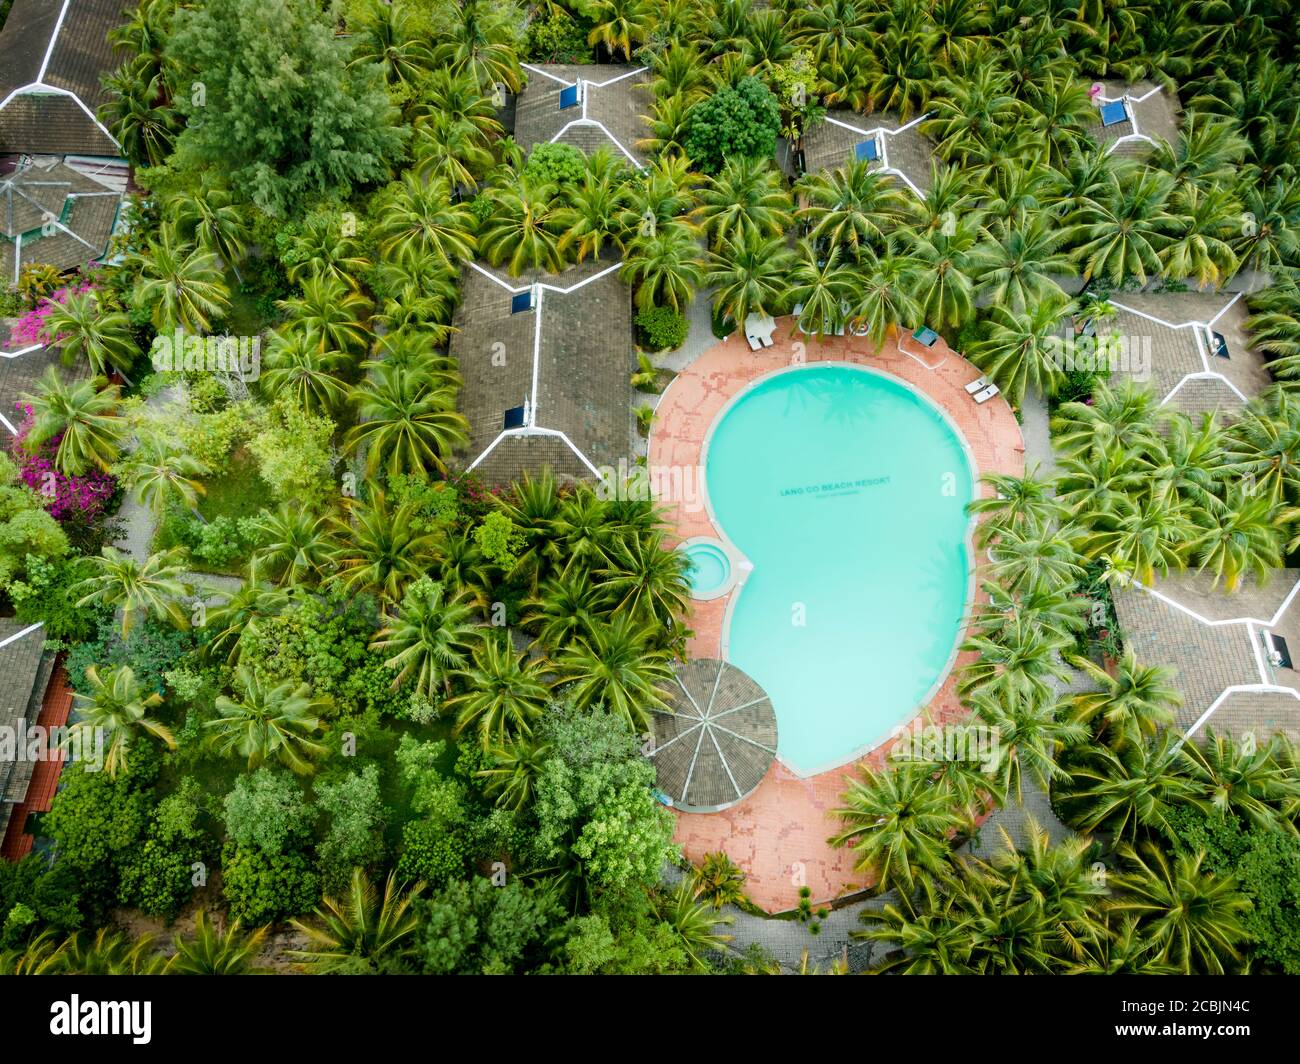 Lang Co Resort, Thua Thien Hue Province, Vietnam - August 3, 2020: Image of Lang Co Tourist Area in Khanh Hoa Province, Vietnam viewed from above. Thi Stock Photo